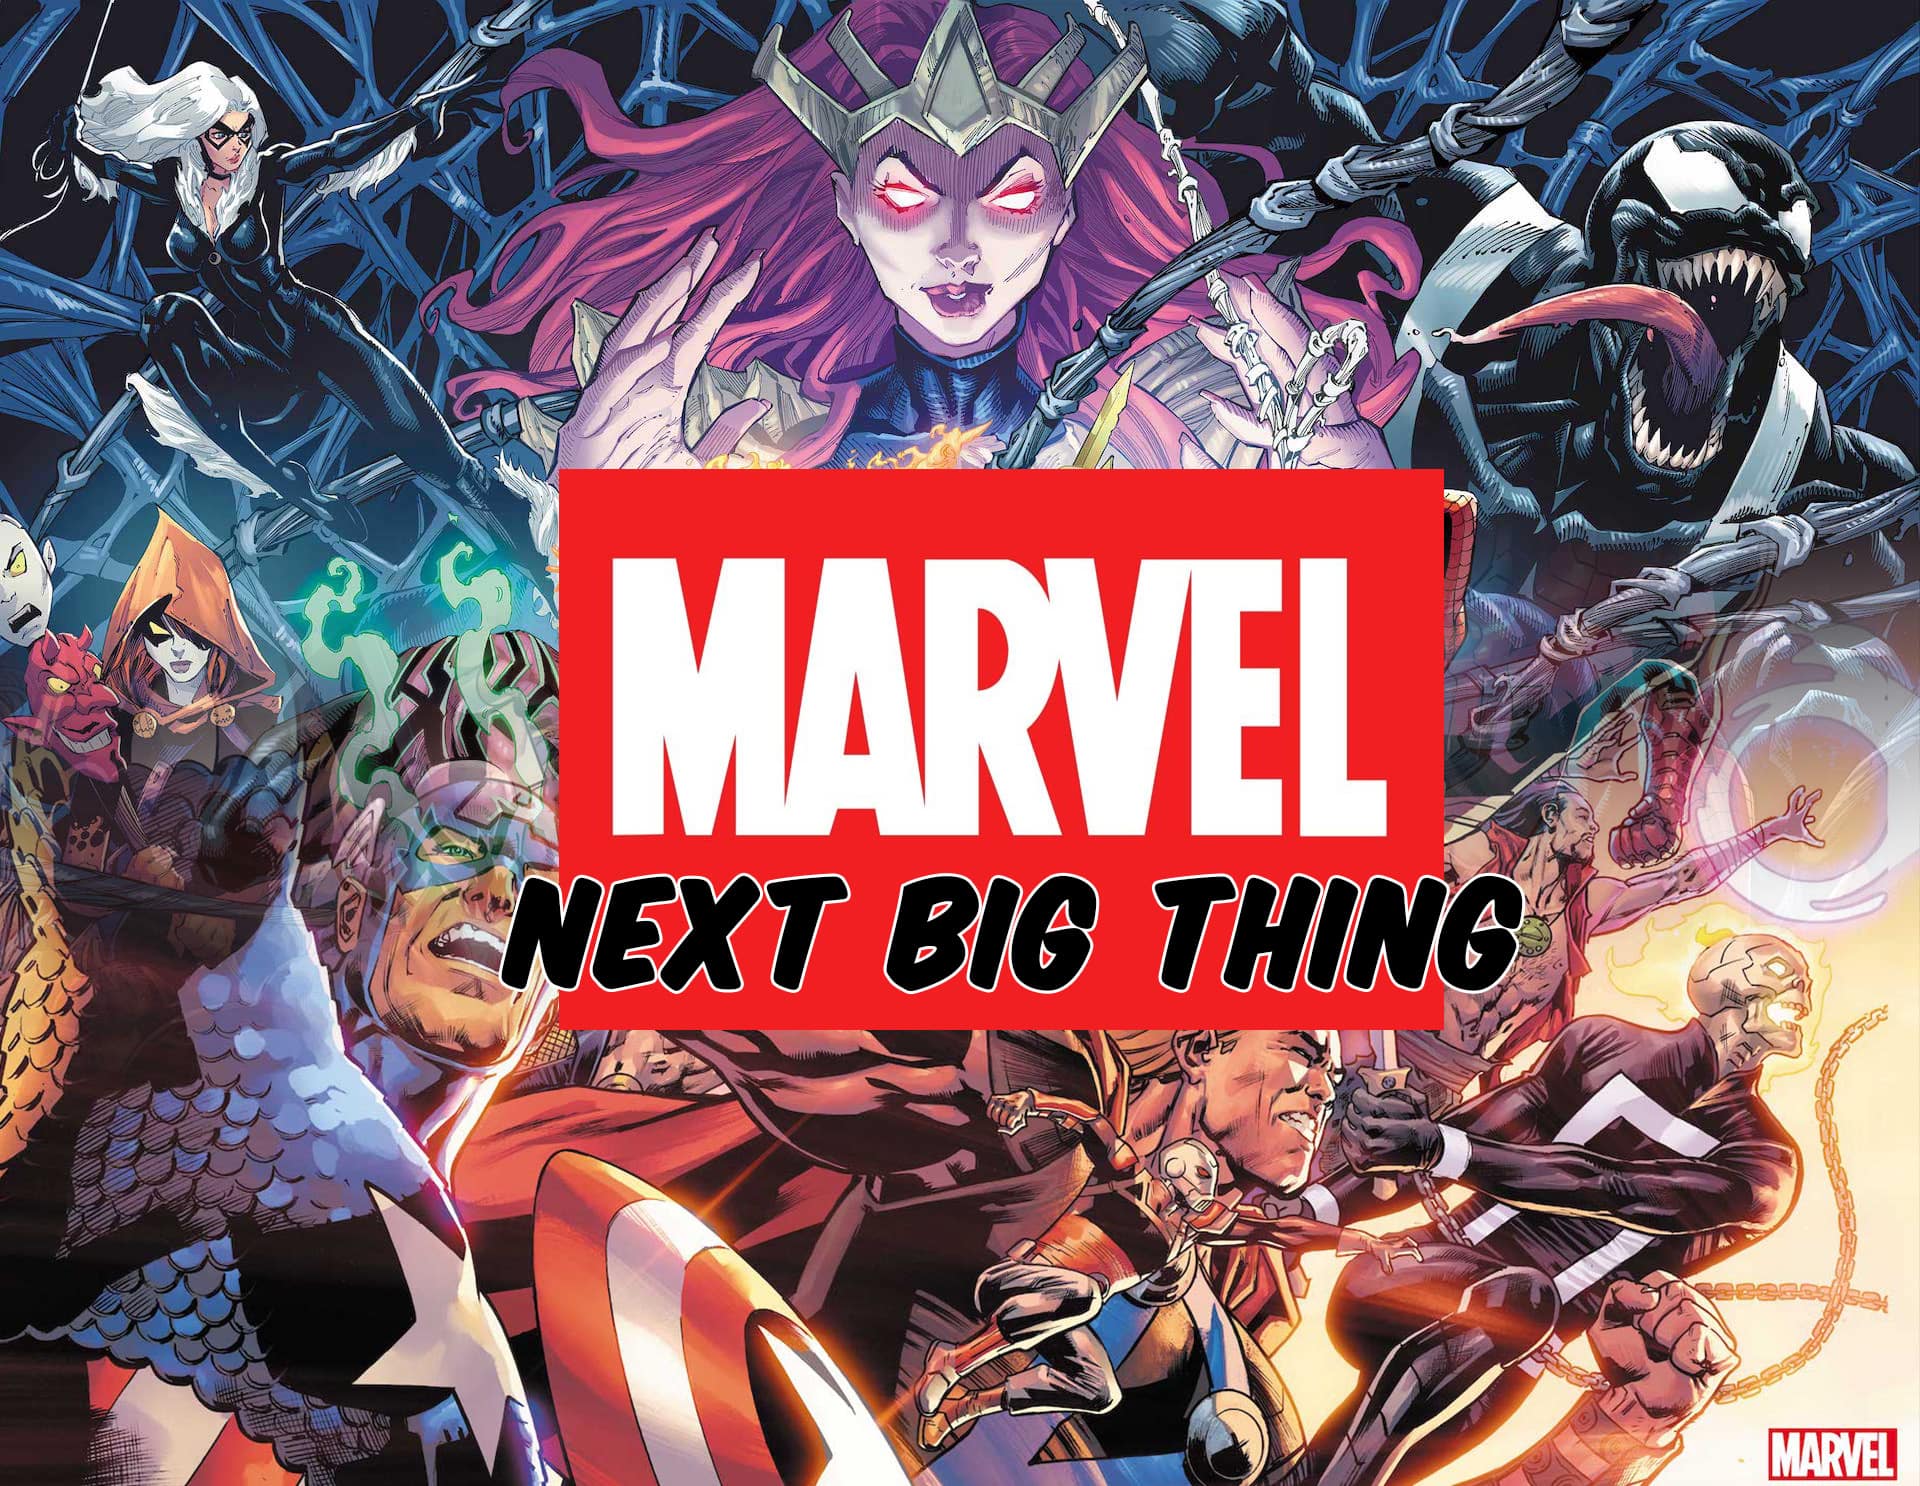 SDCC '22: Every 'Marvel Comics: Next Big Thing' panel reveal